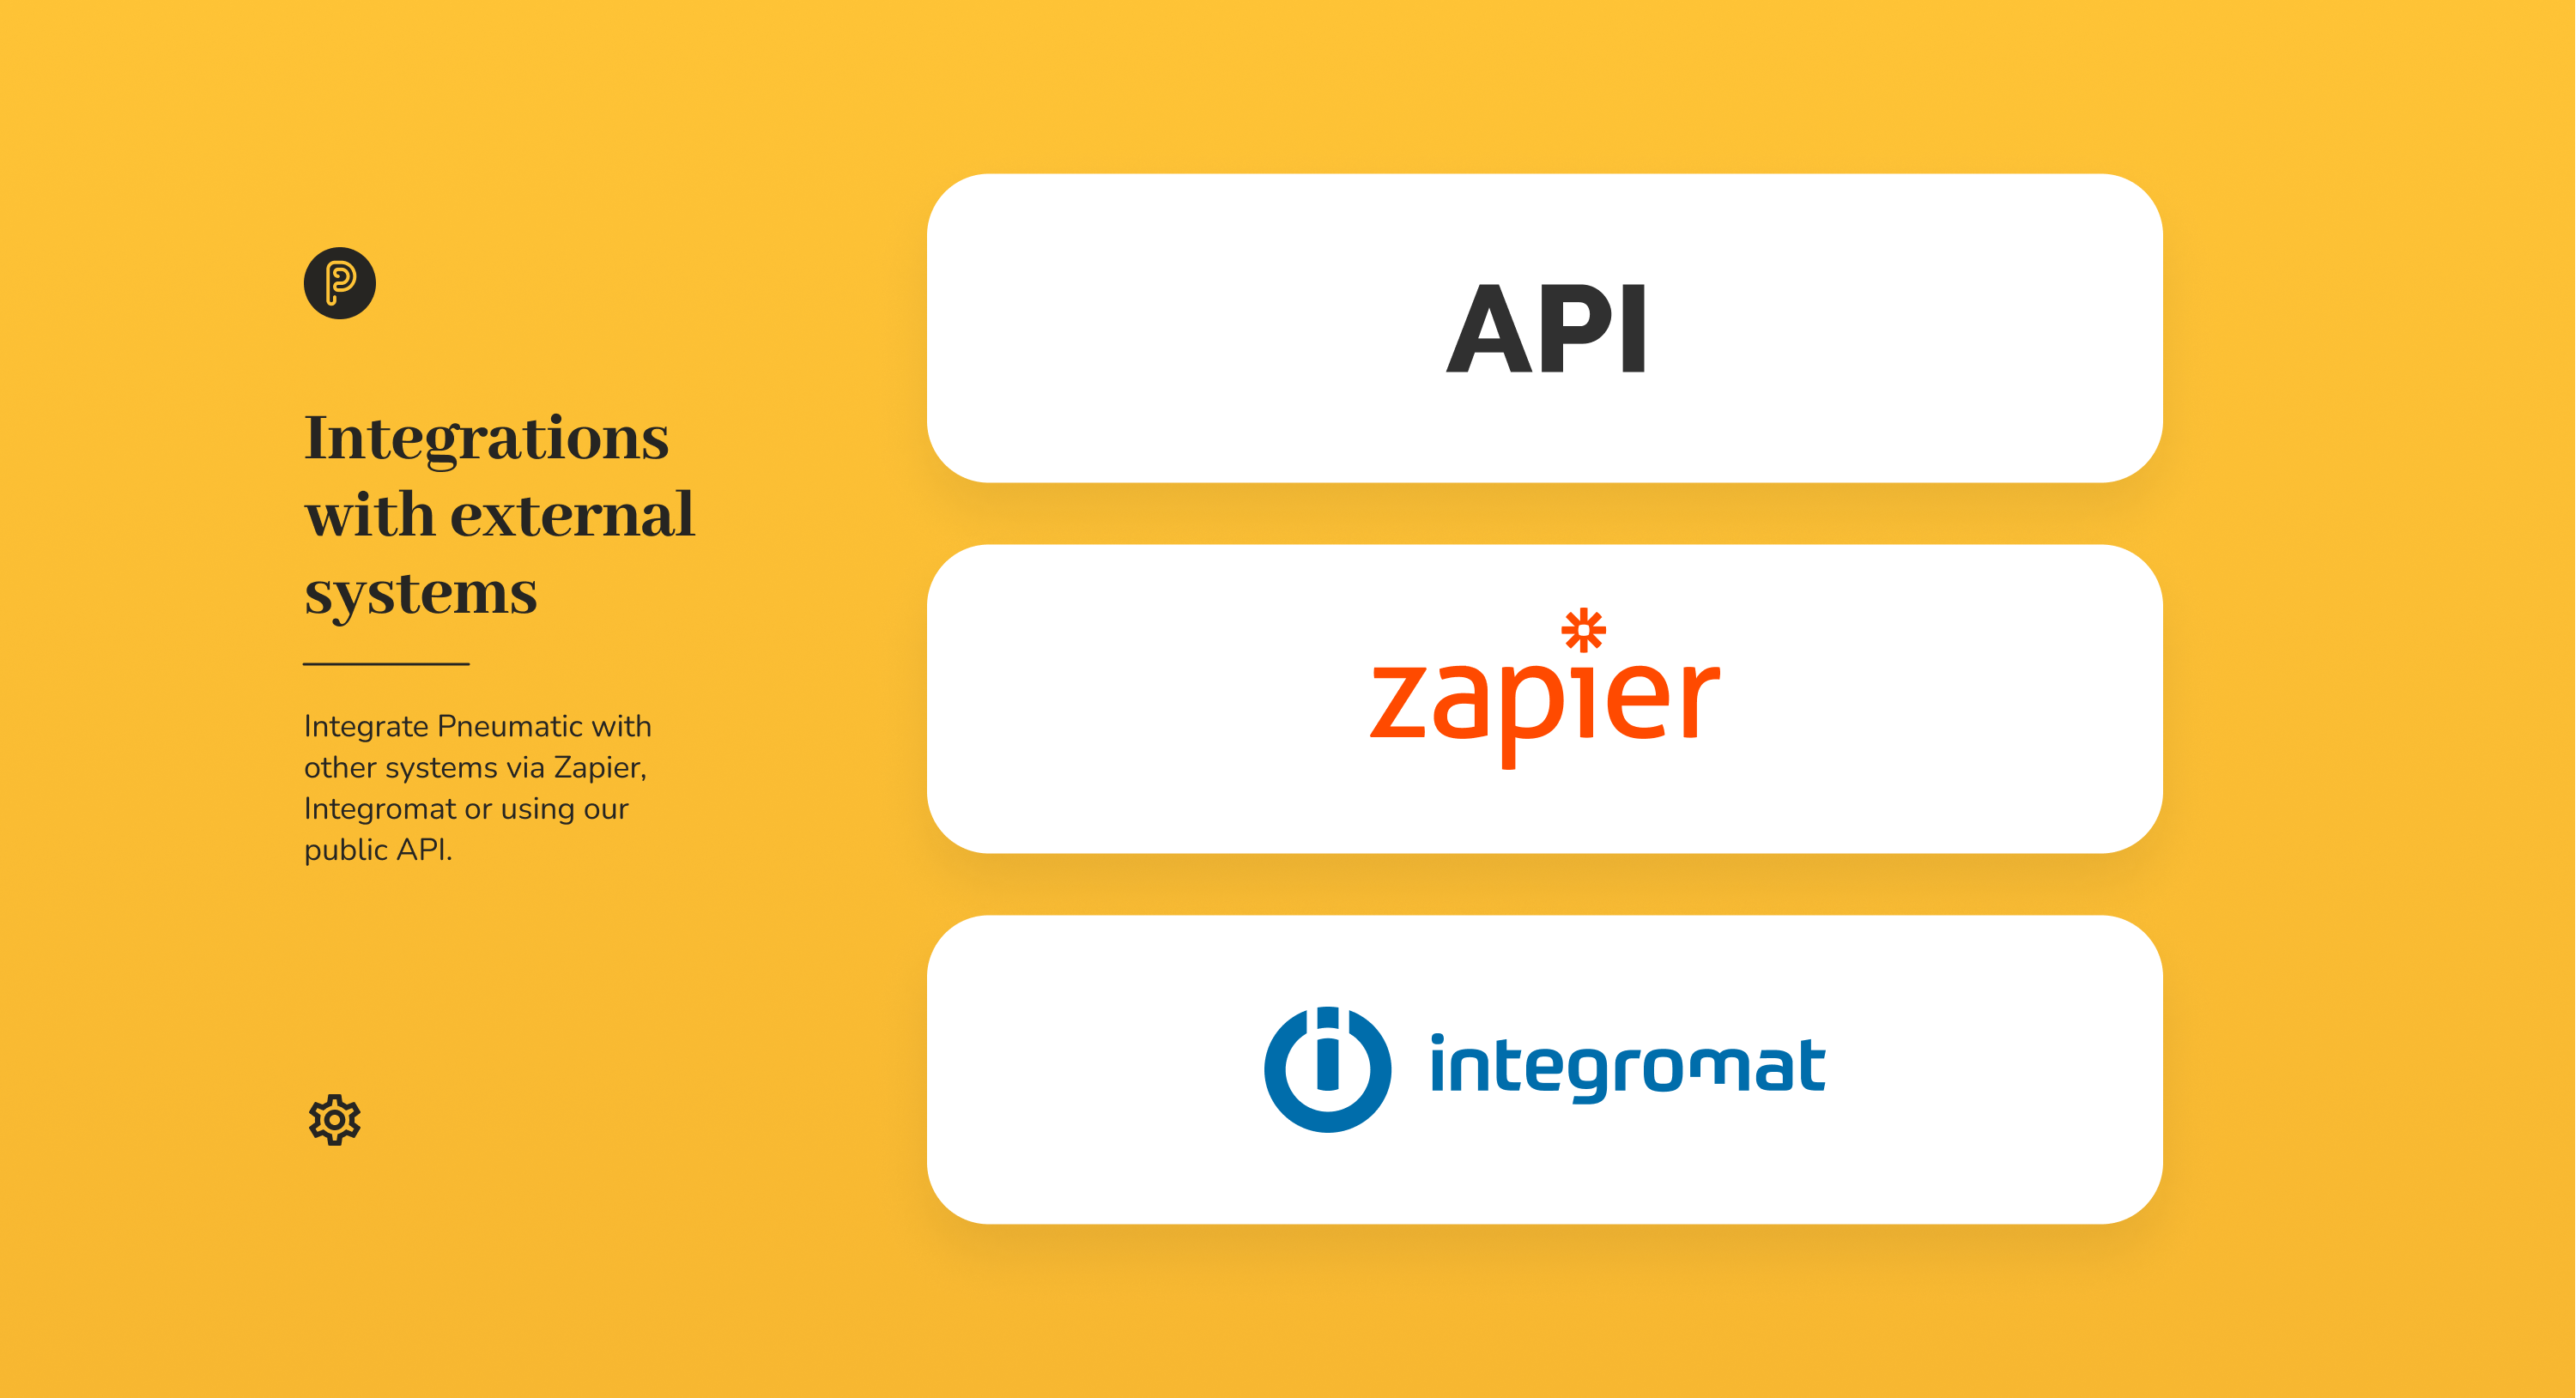 Integrate Pneumatic with many external systems via Zapier, Integromat or using our public API